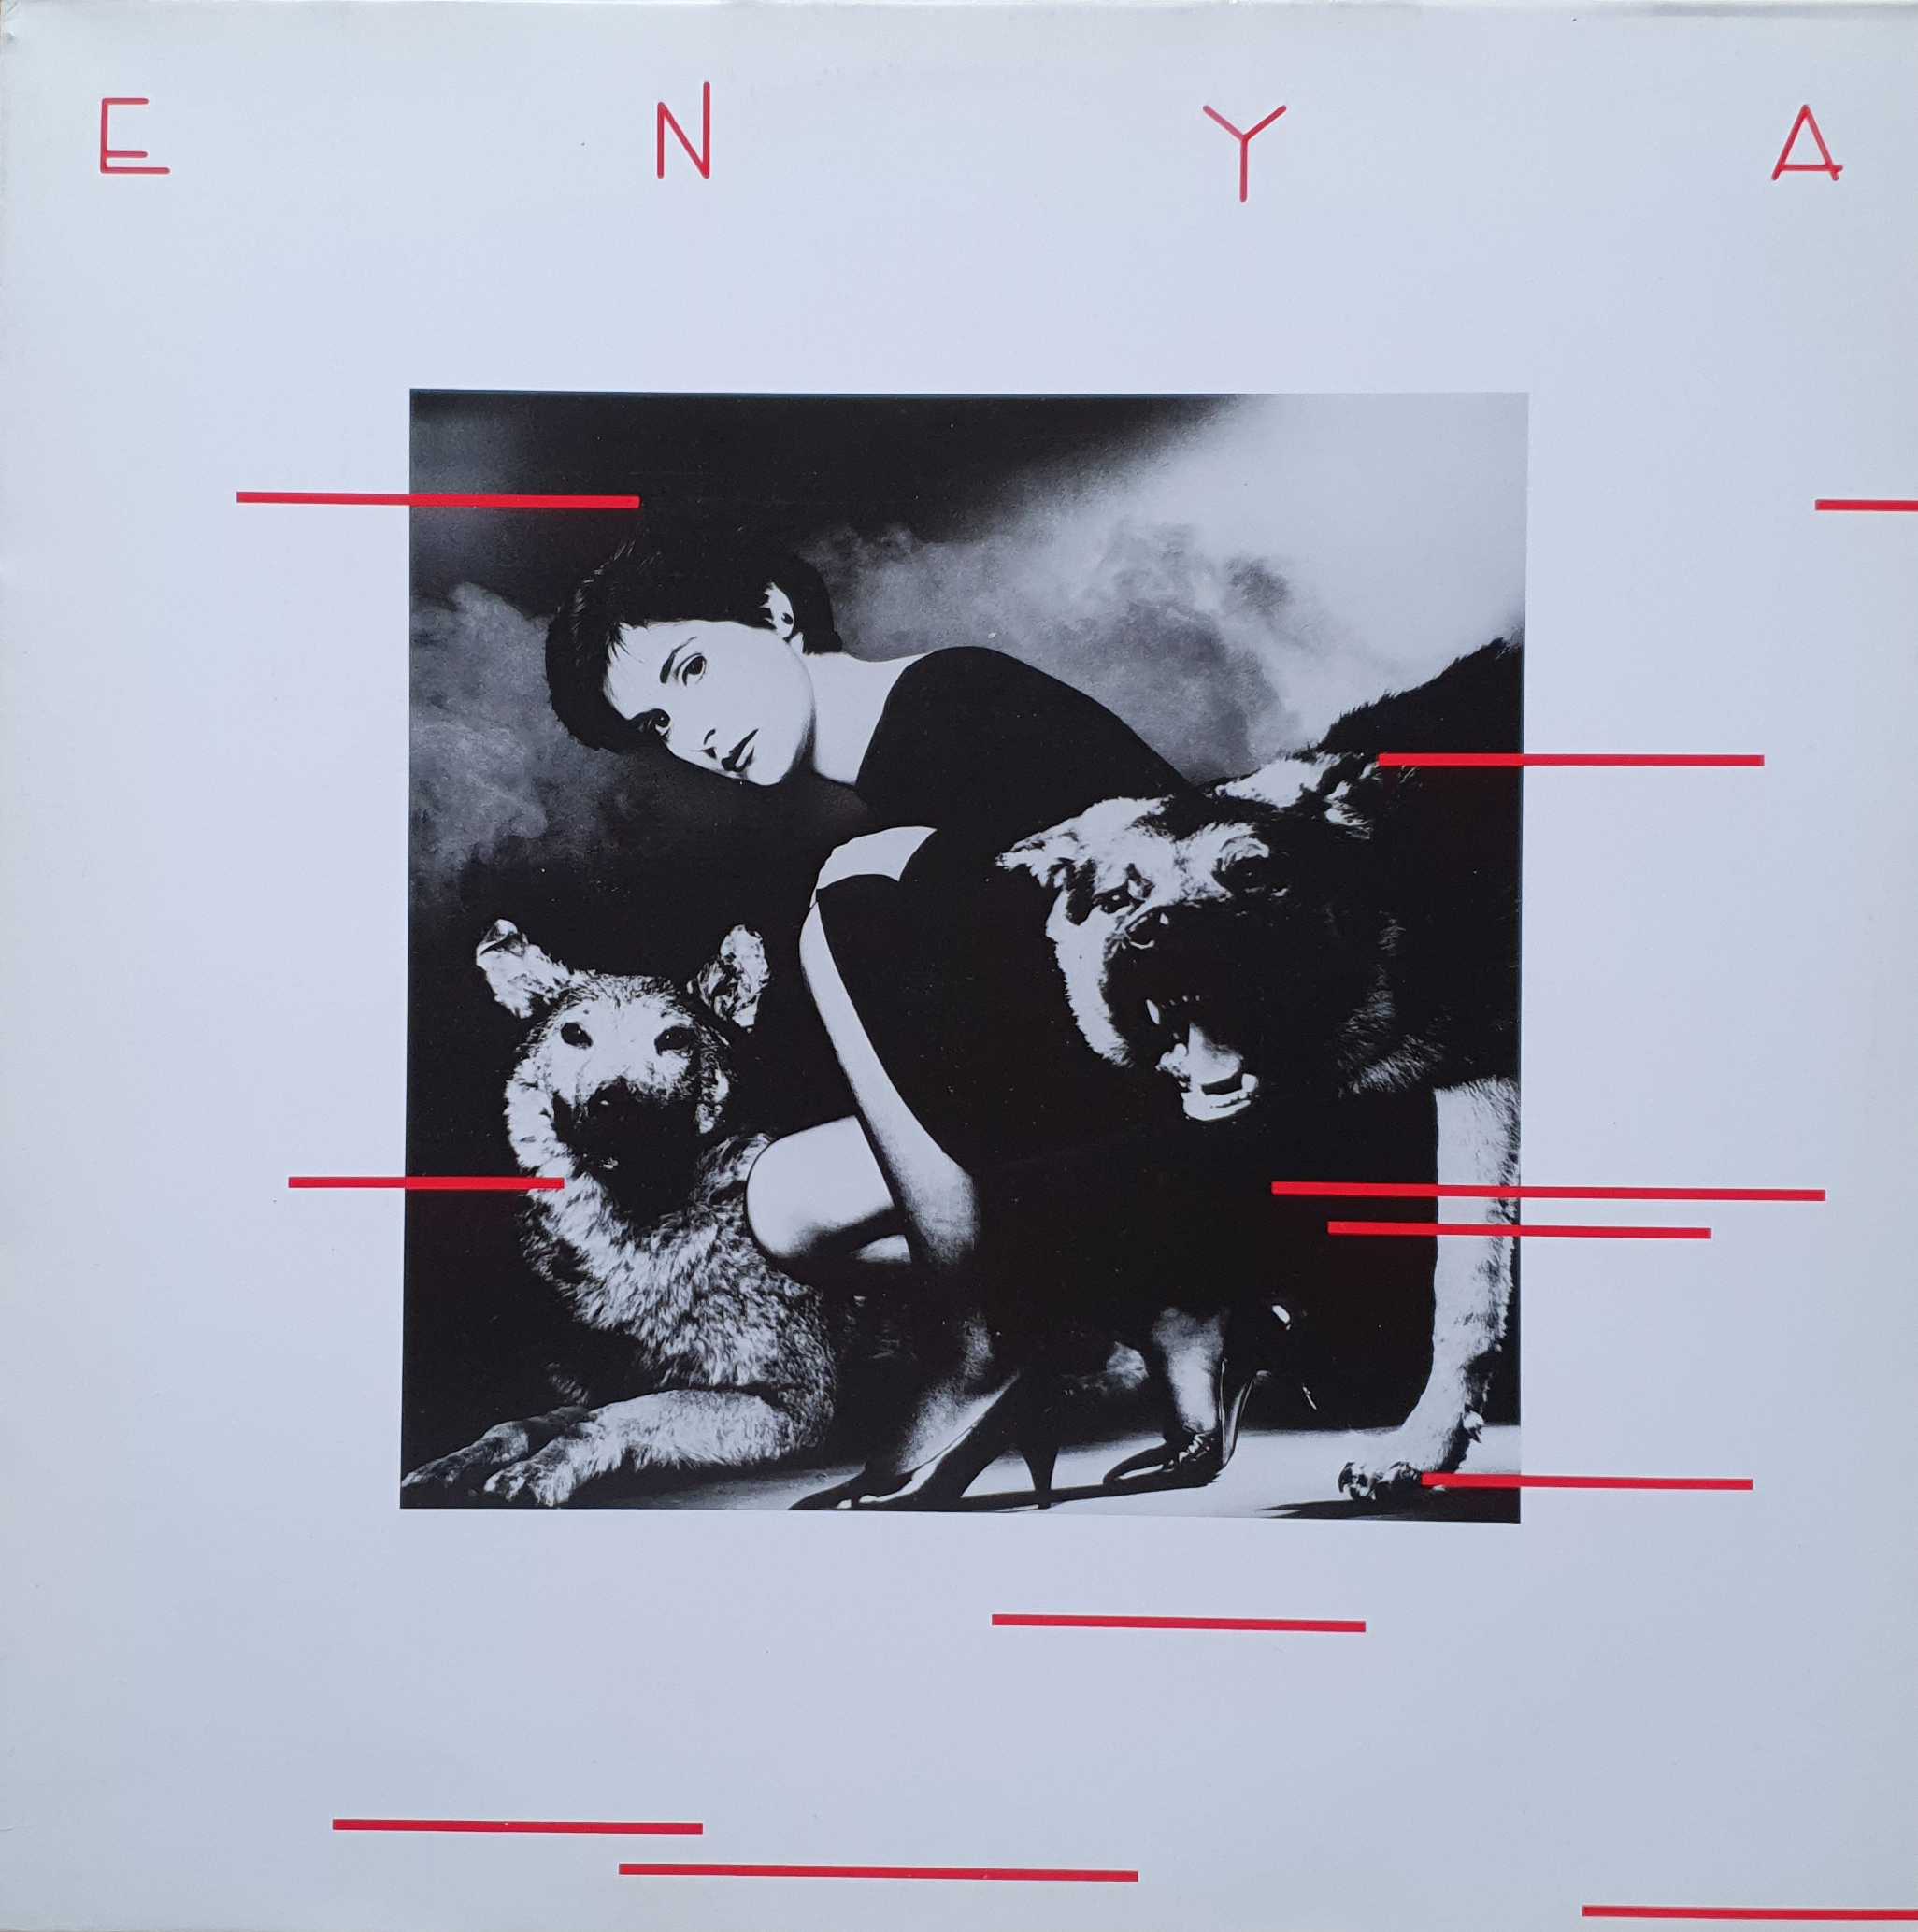 Picture of F - 108 Enya by artist Enya from the BBC albums - Records and Tapes library